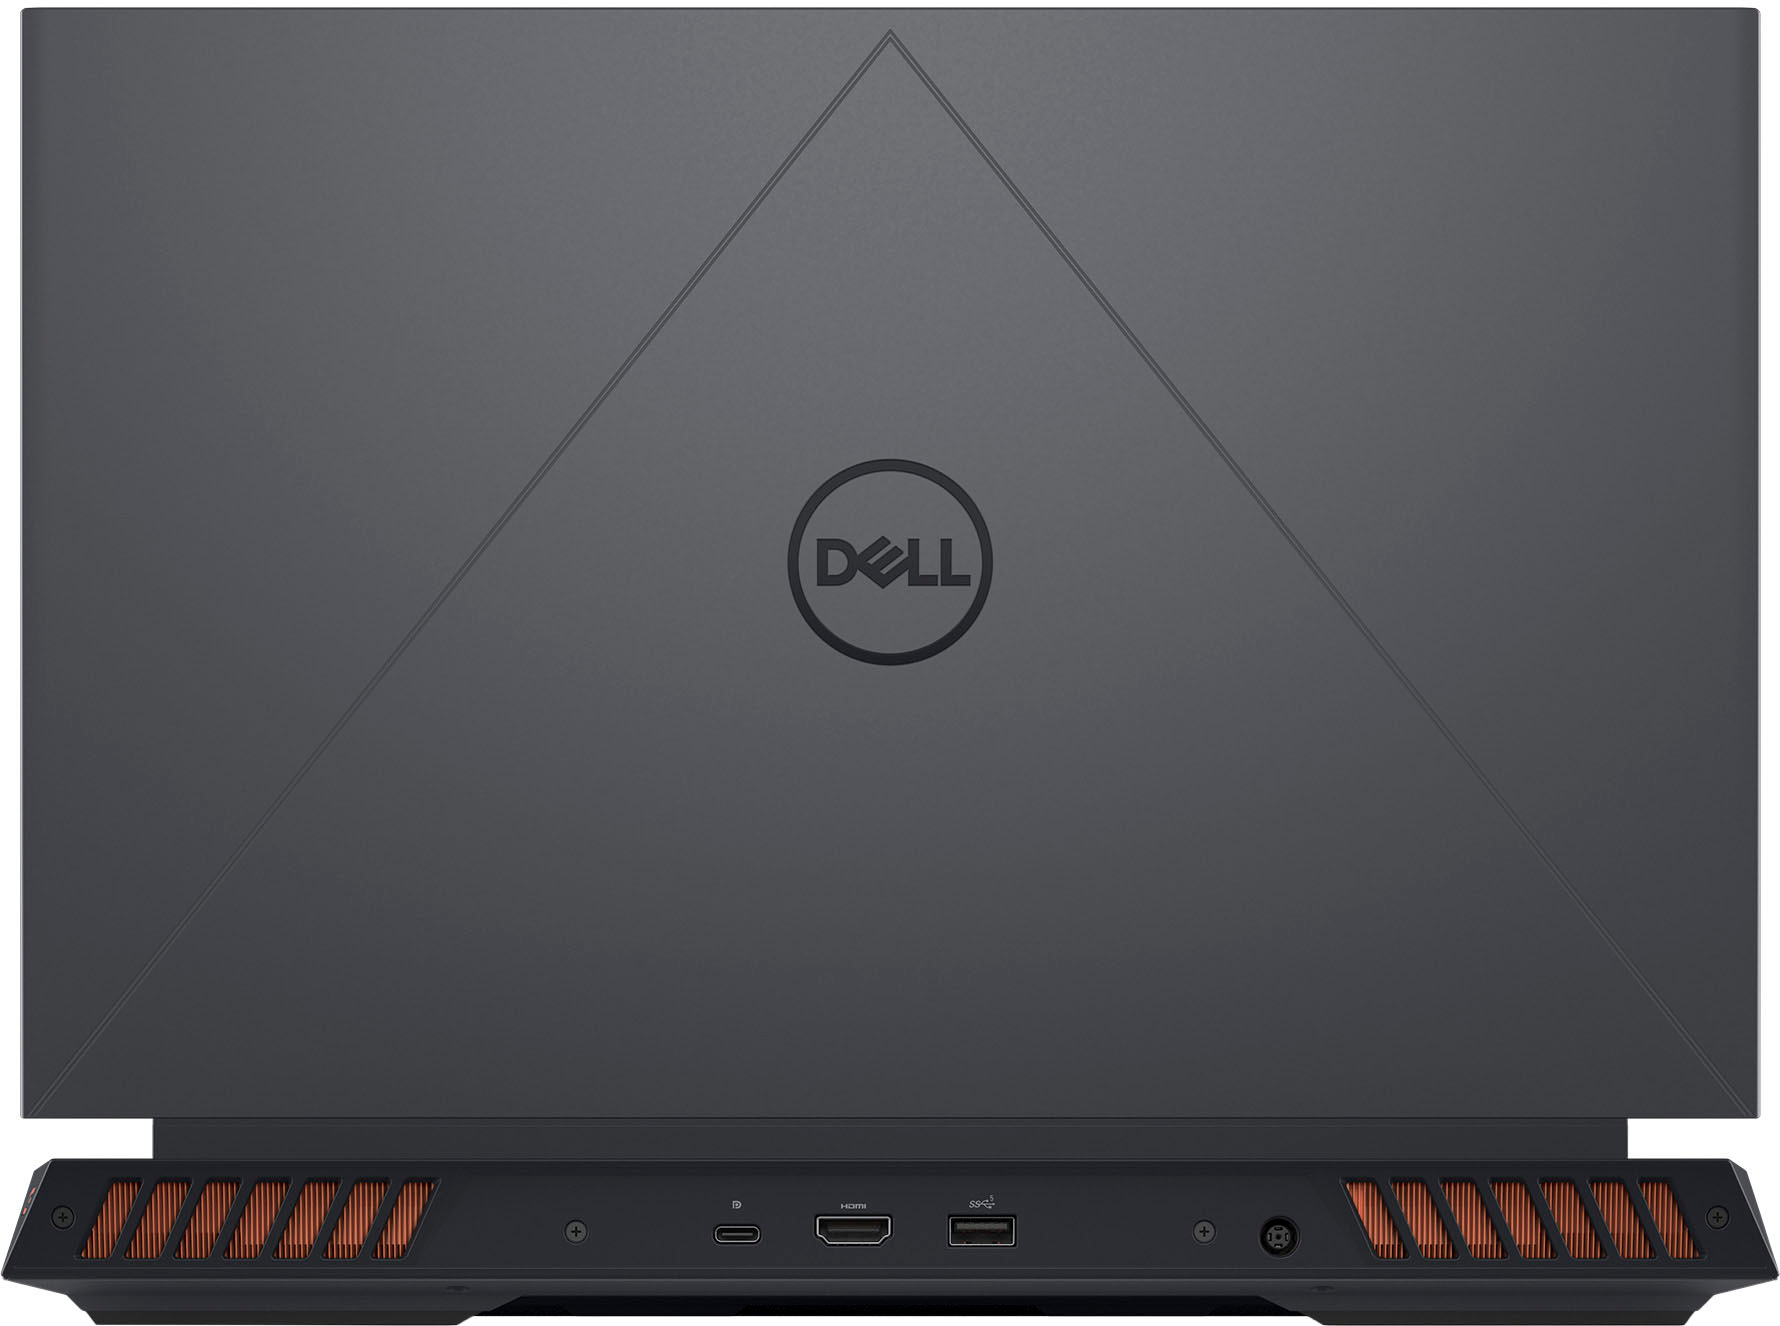 Dell G15 (2023) Review: a Budget Gaming Laptop With Top-Tier Hardware